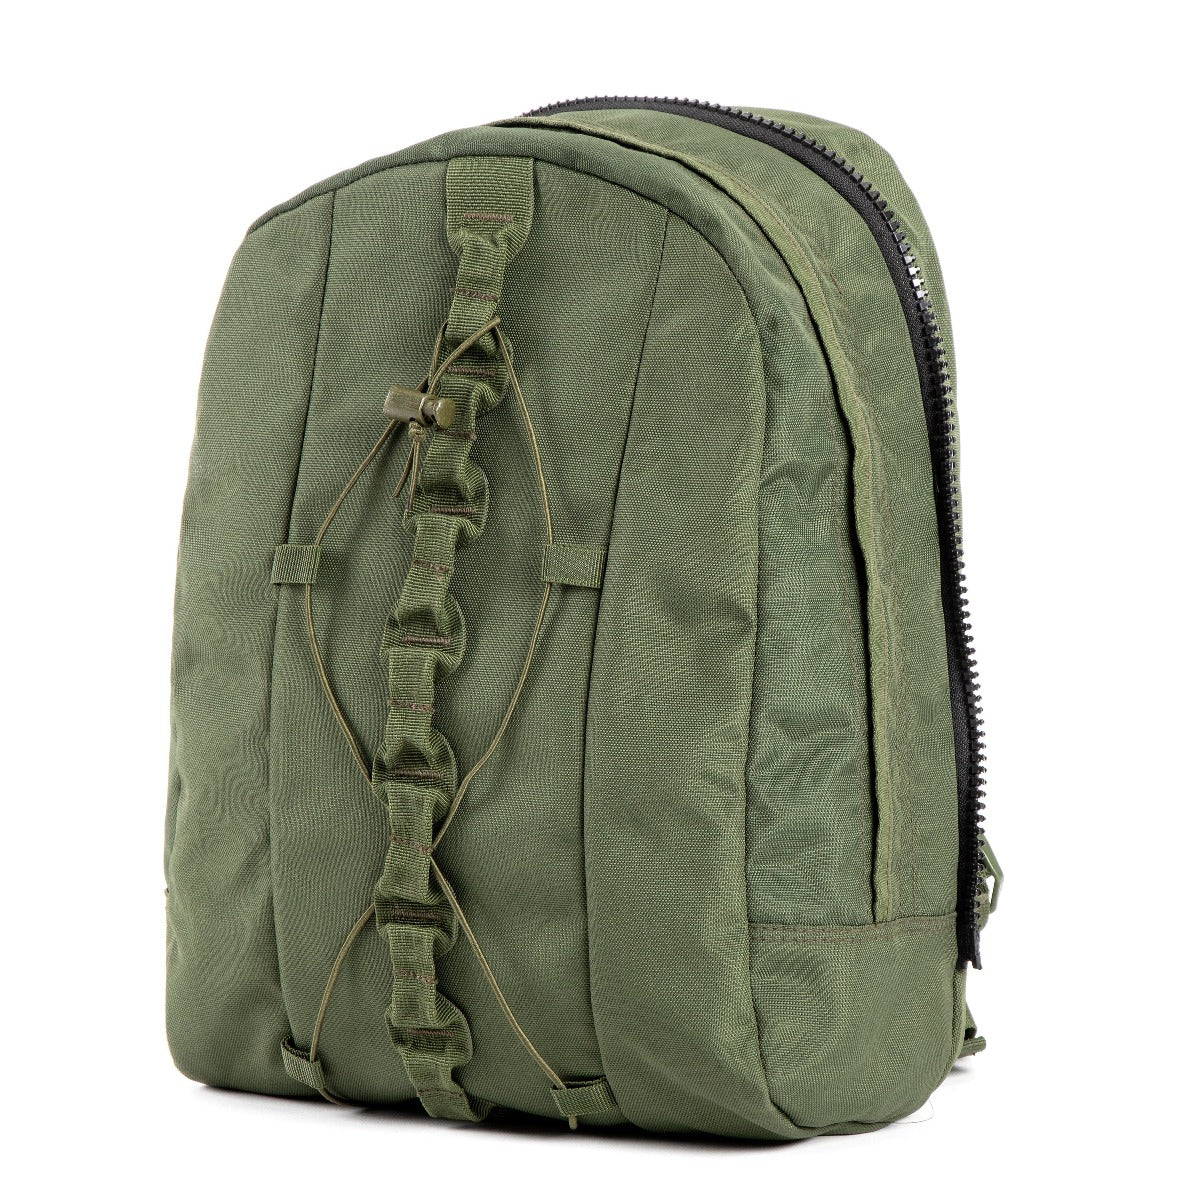 Colonel Series Rucksack + Detachable Day Pack & Rain Cover - 80 Litres- Army Green 7